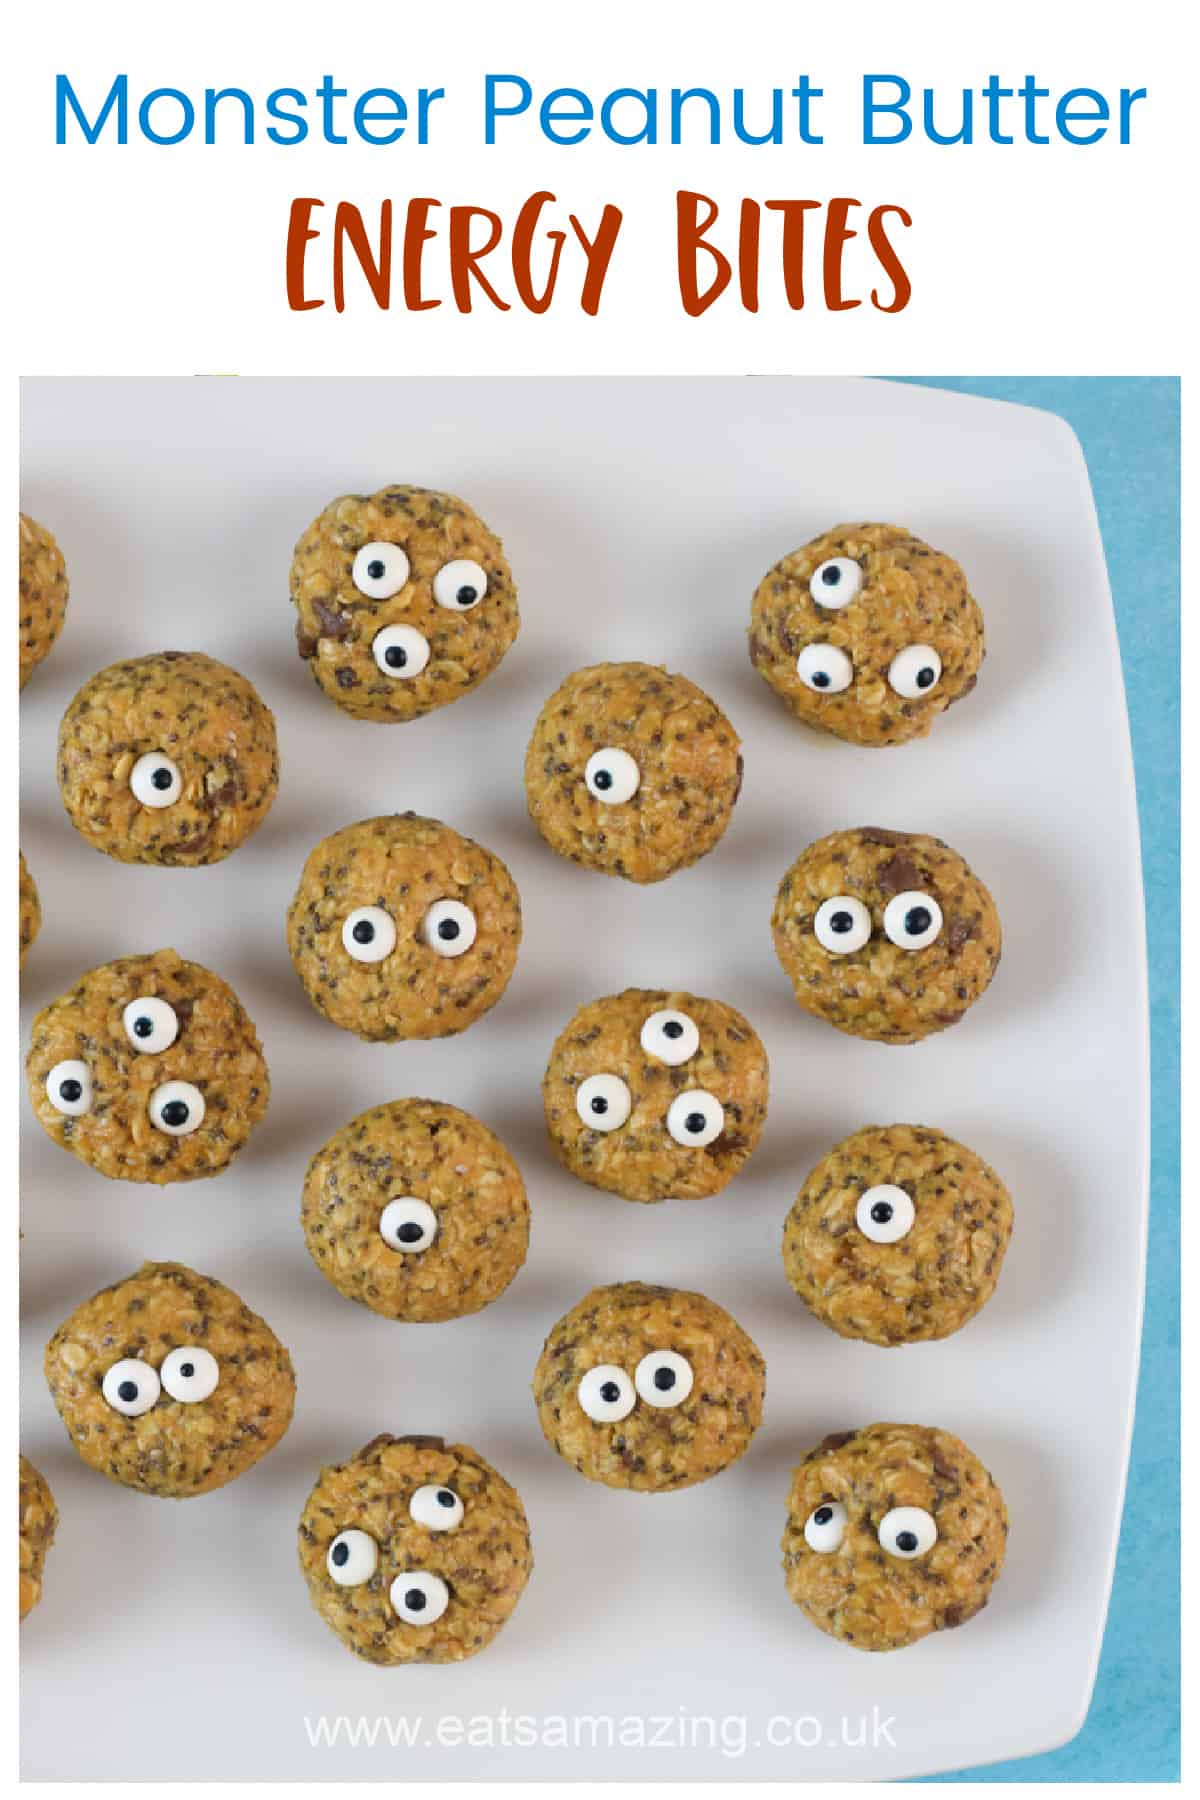 How to make quick and easy monster peanut butter energy bites - fun healthy snack for kids